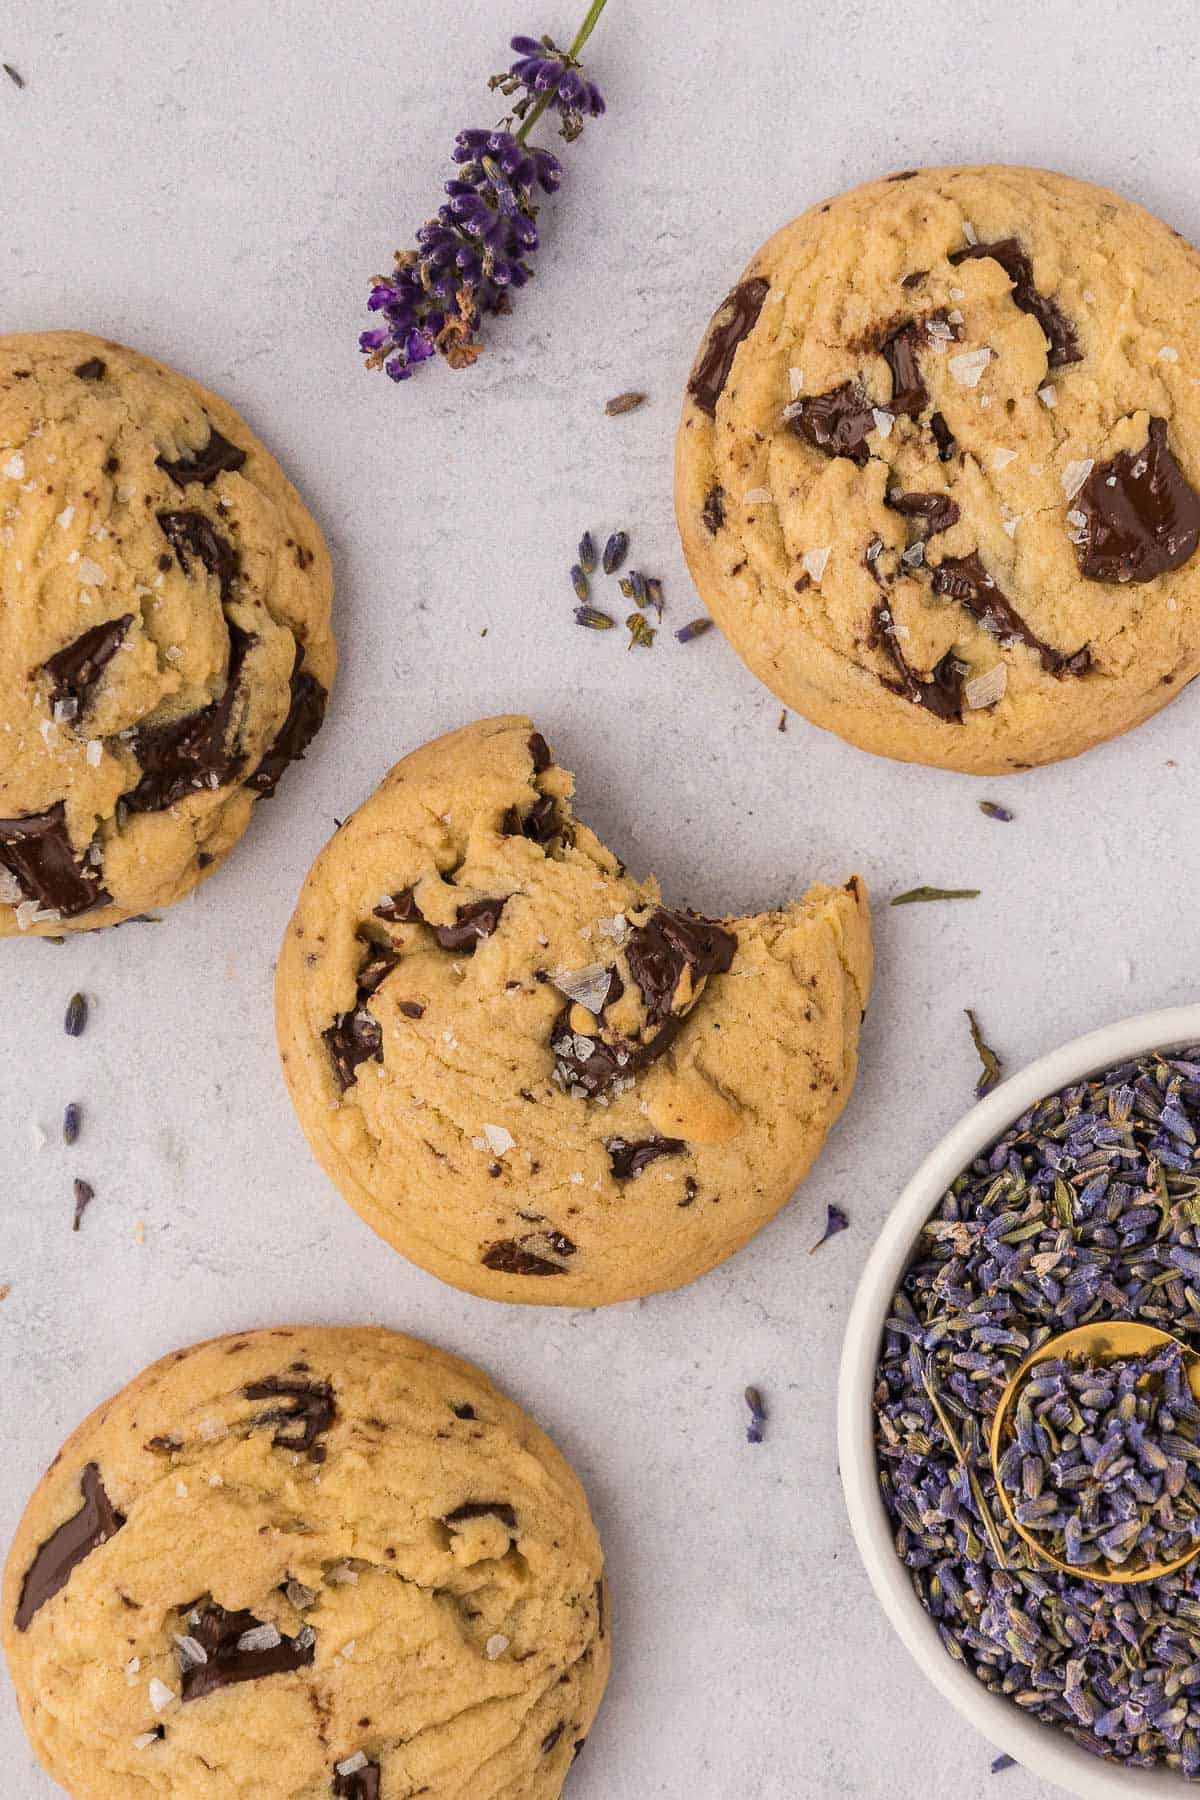 Four chocolate chunk cookies against a pink background with one bitten into and a bowl of lavender on the right.